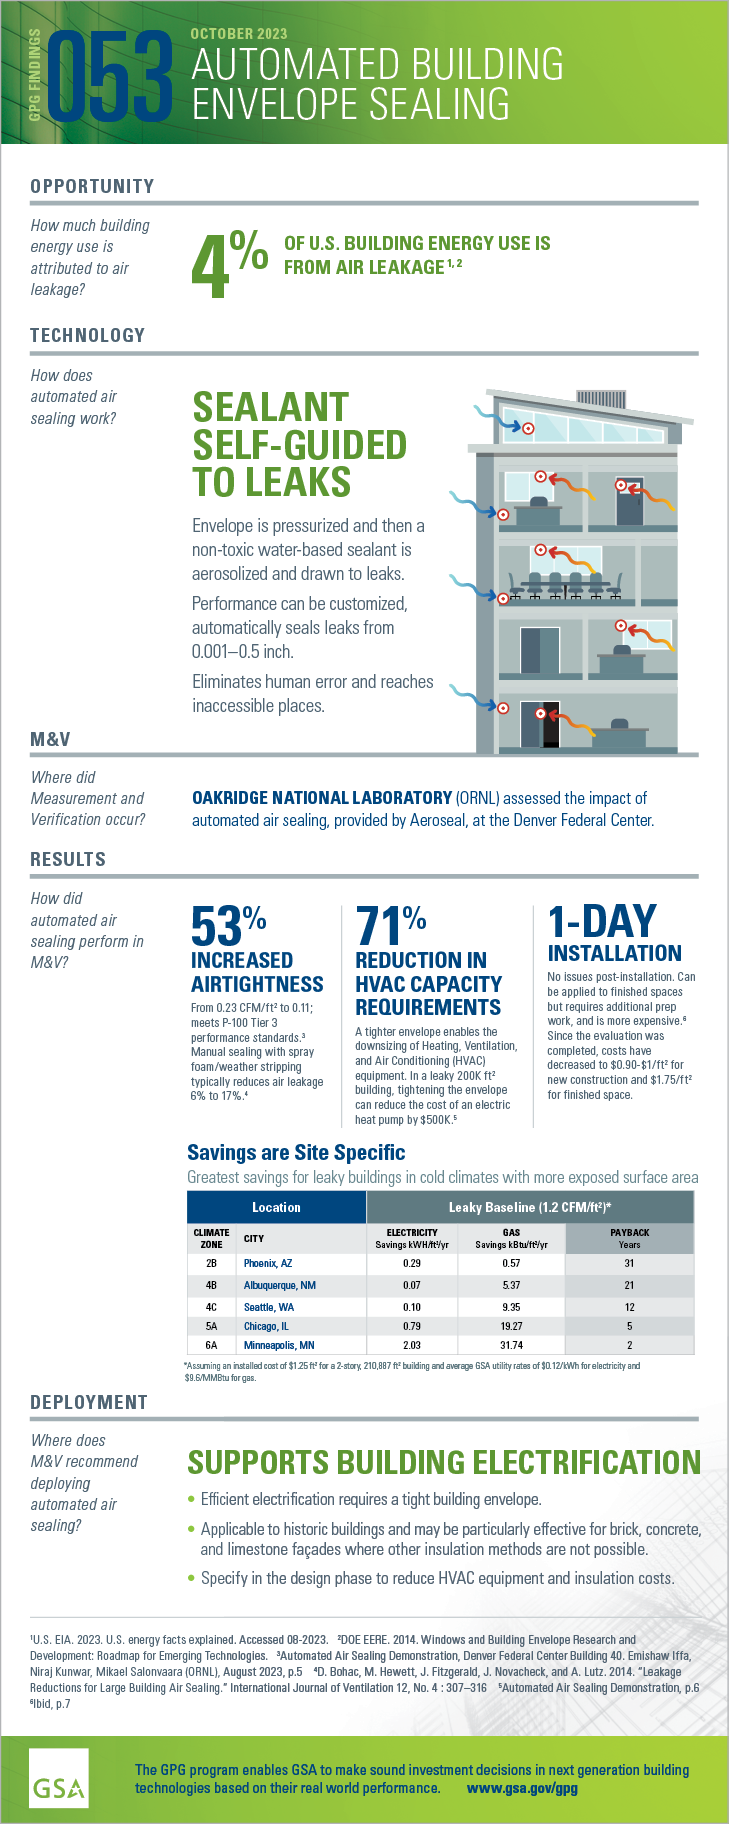 Download the PDF of the full-size infographic for GPG053 Automated Building Envelope Sealing